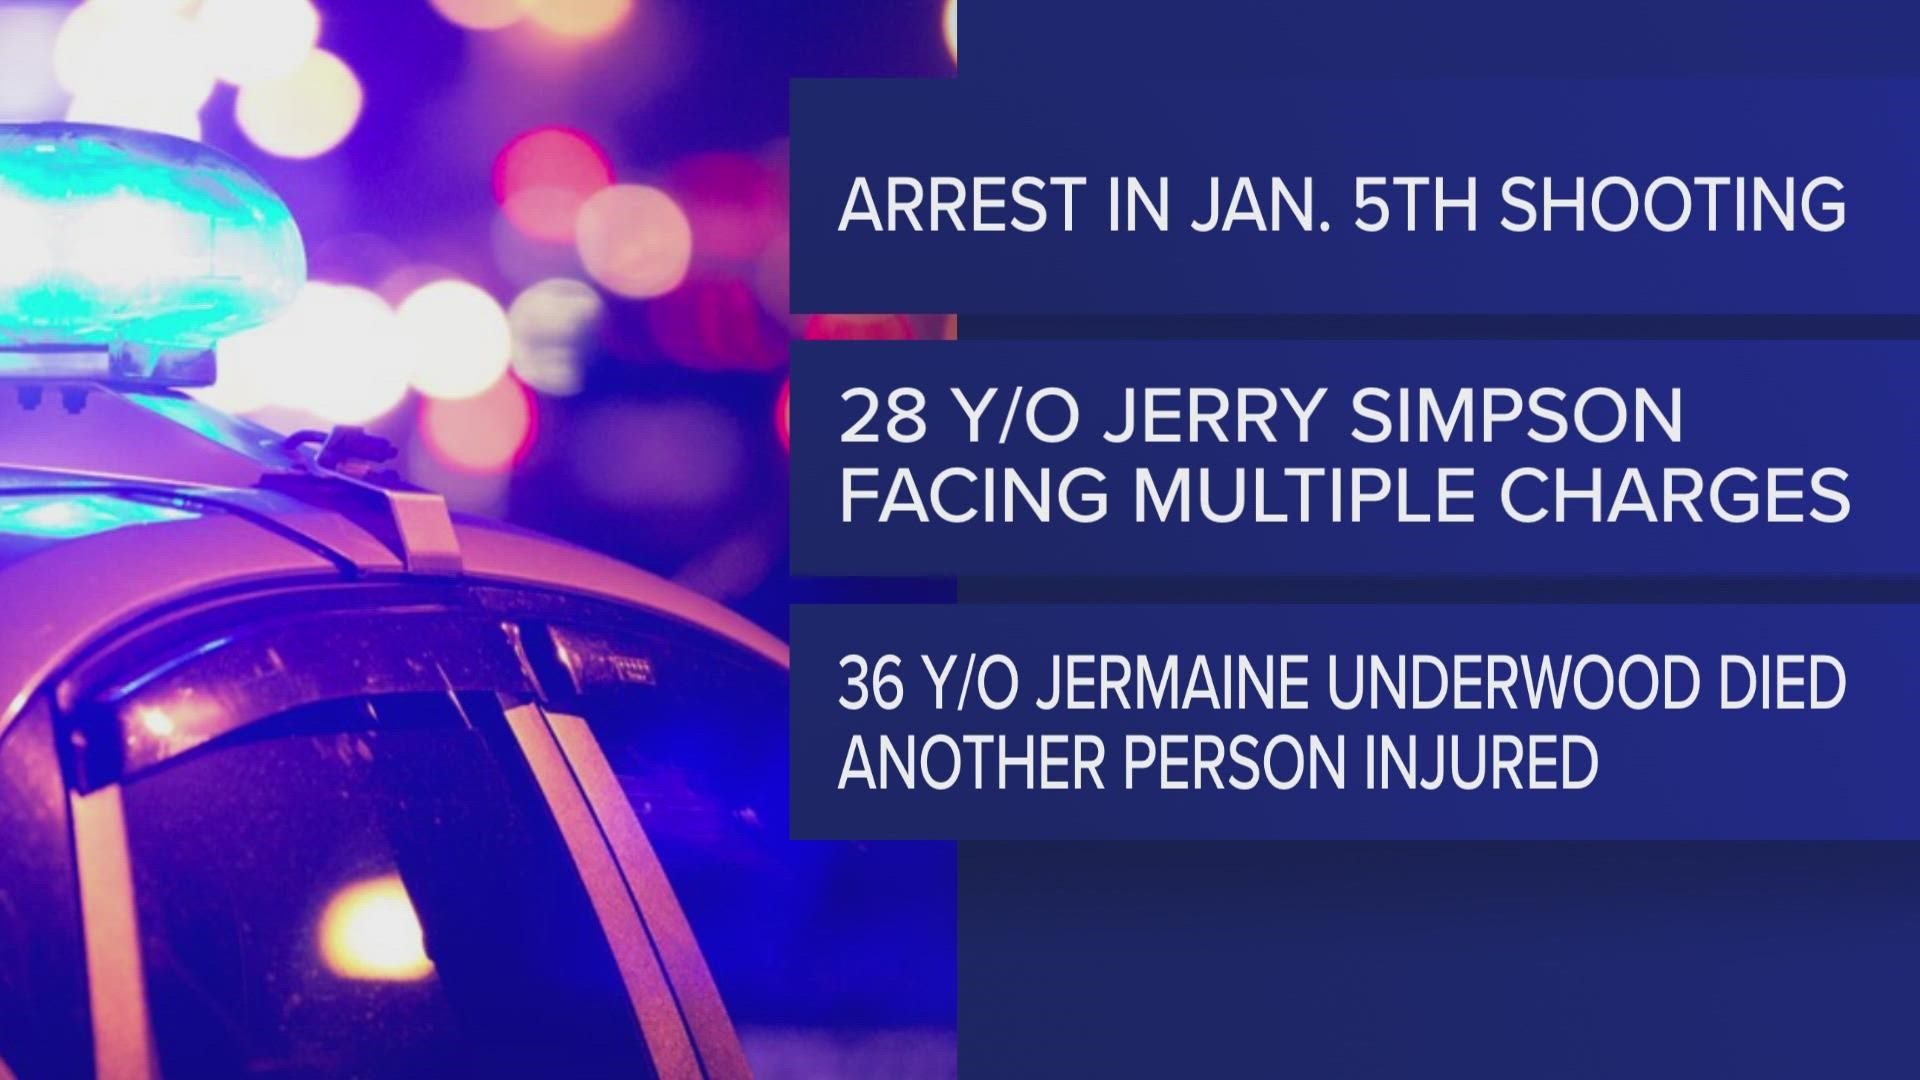 Jerry Simpson is facing multiple charges after allegedly shooting and killing Jermaine Underwood, and injuring another person.